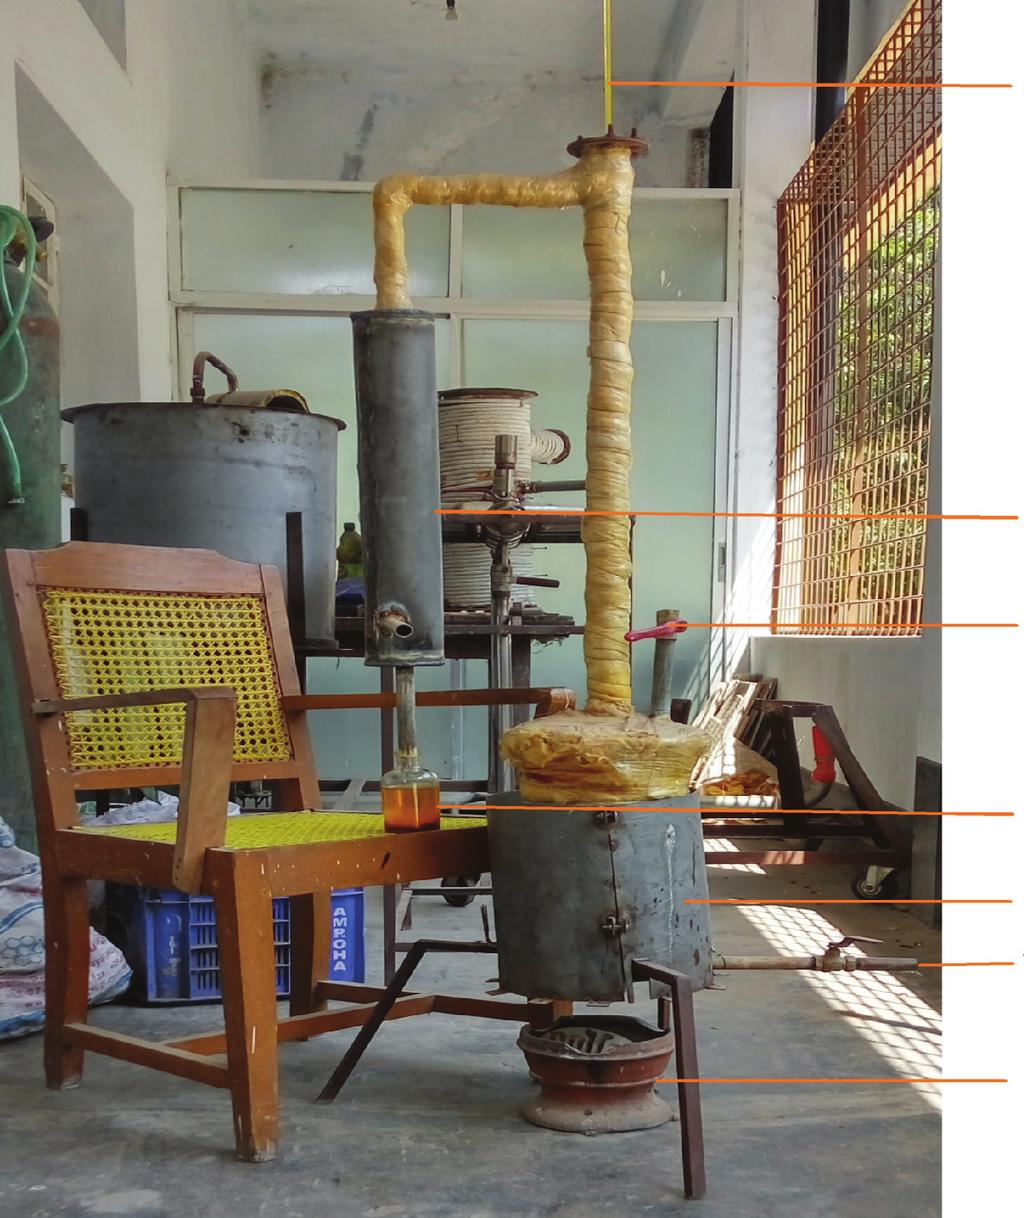 Thermometer Condenser Oil input valve Refined oil Reactor Nitrogen supply line Heater Figure 4: Experimental setup of the distillation plant. Figure 2: Crude tire pyrolysis oil from waste tire.